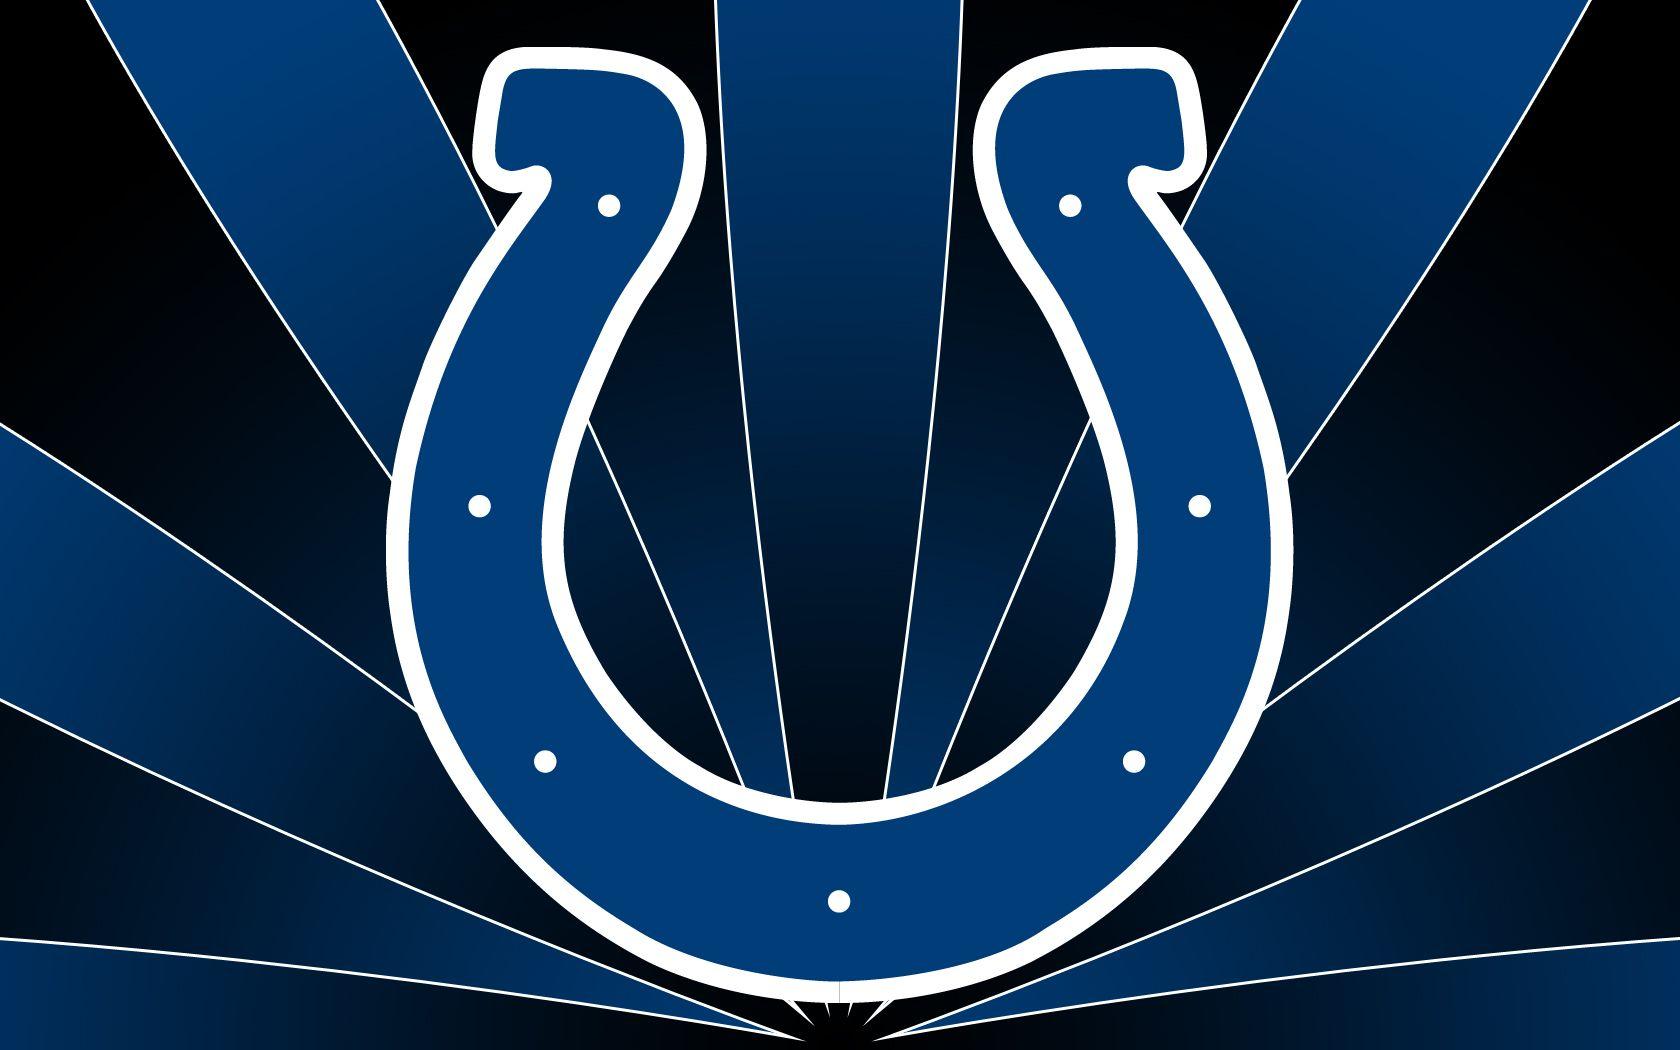 Colts Logo Wallpapers Image & Pictures